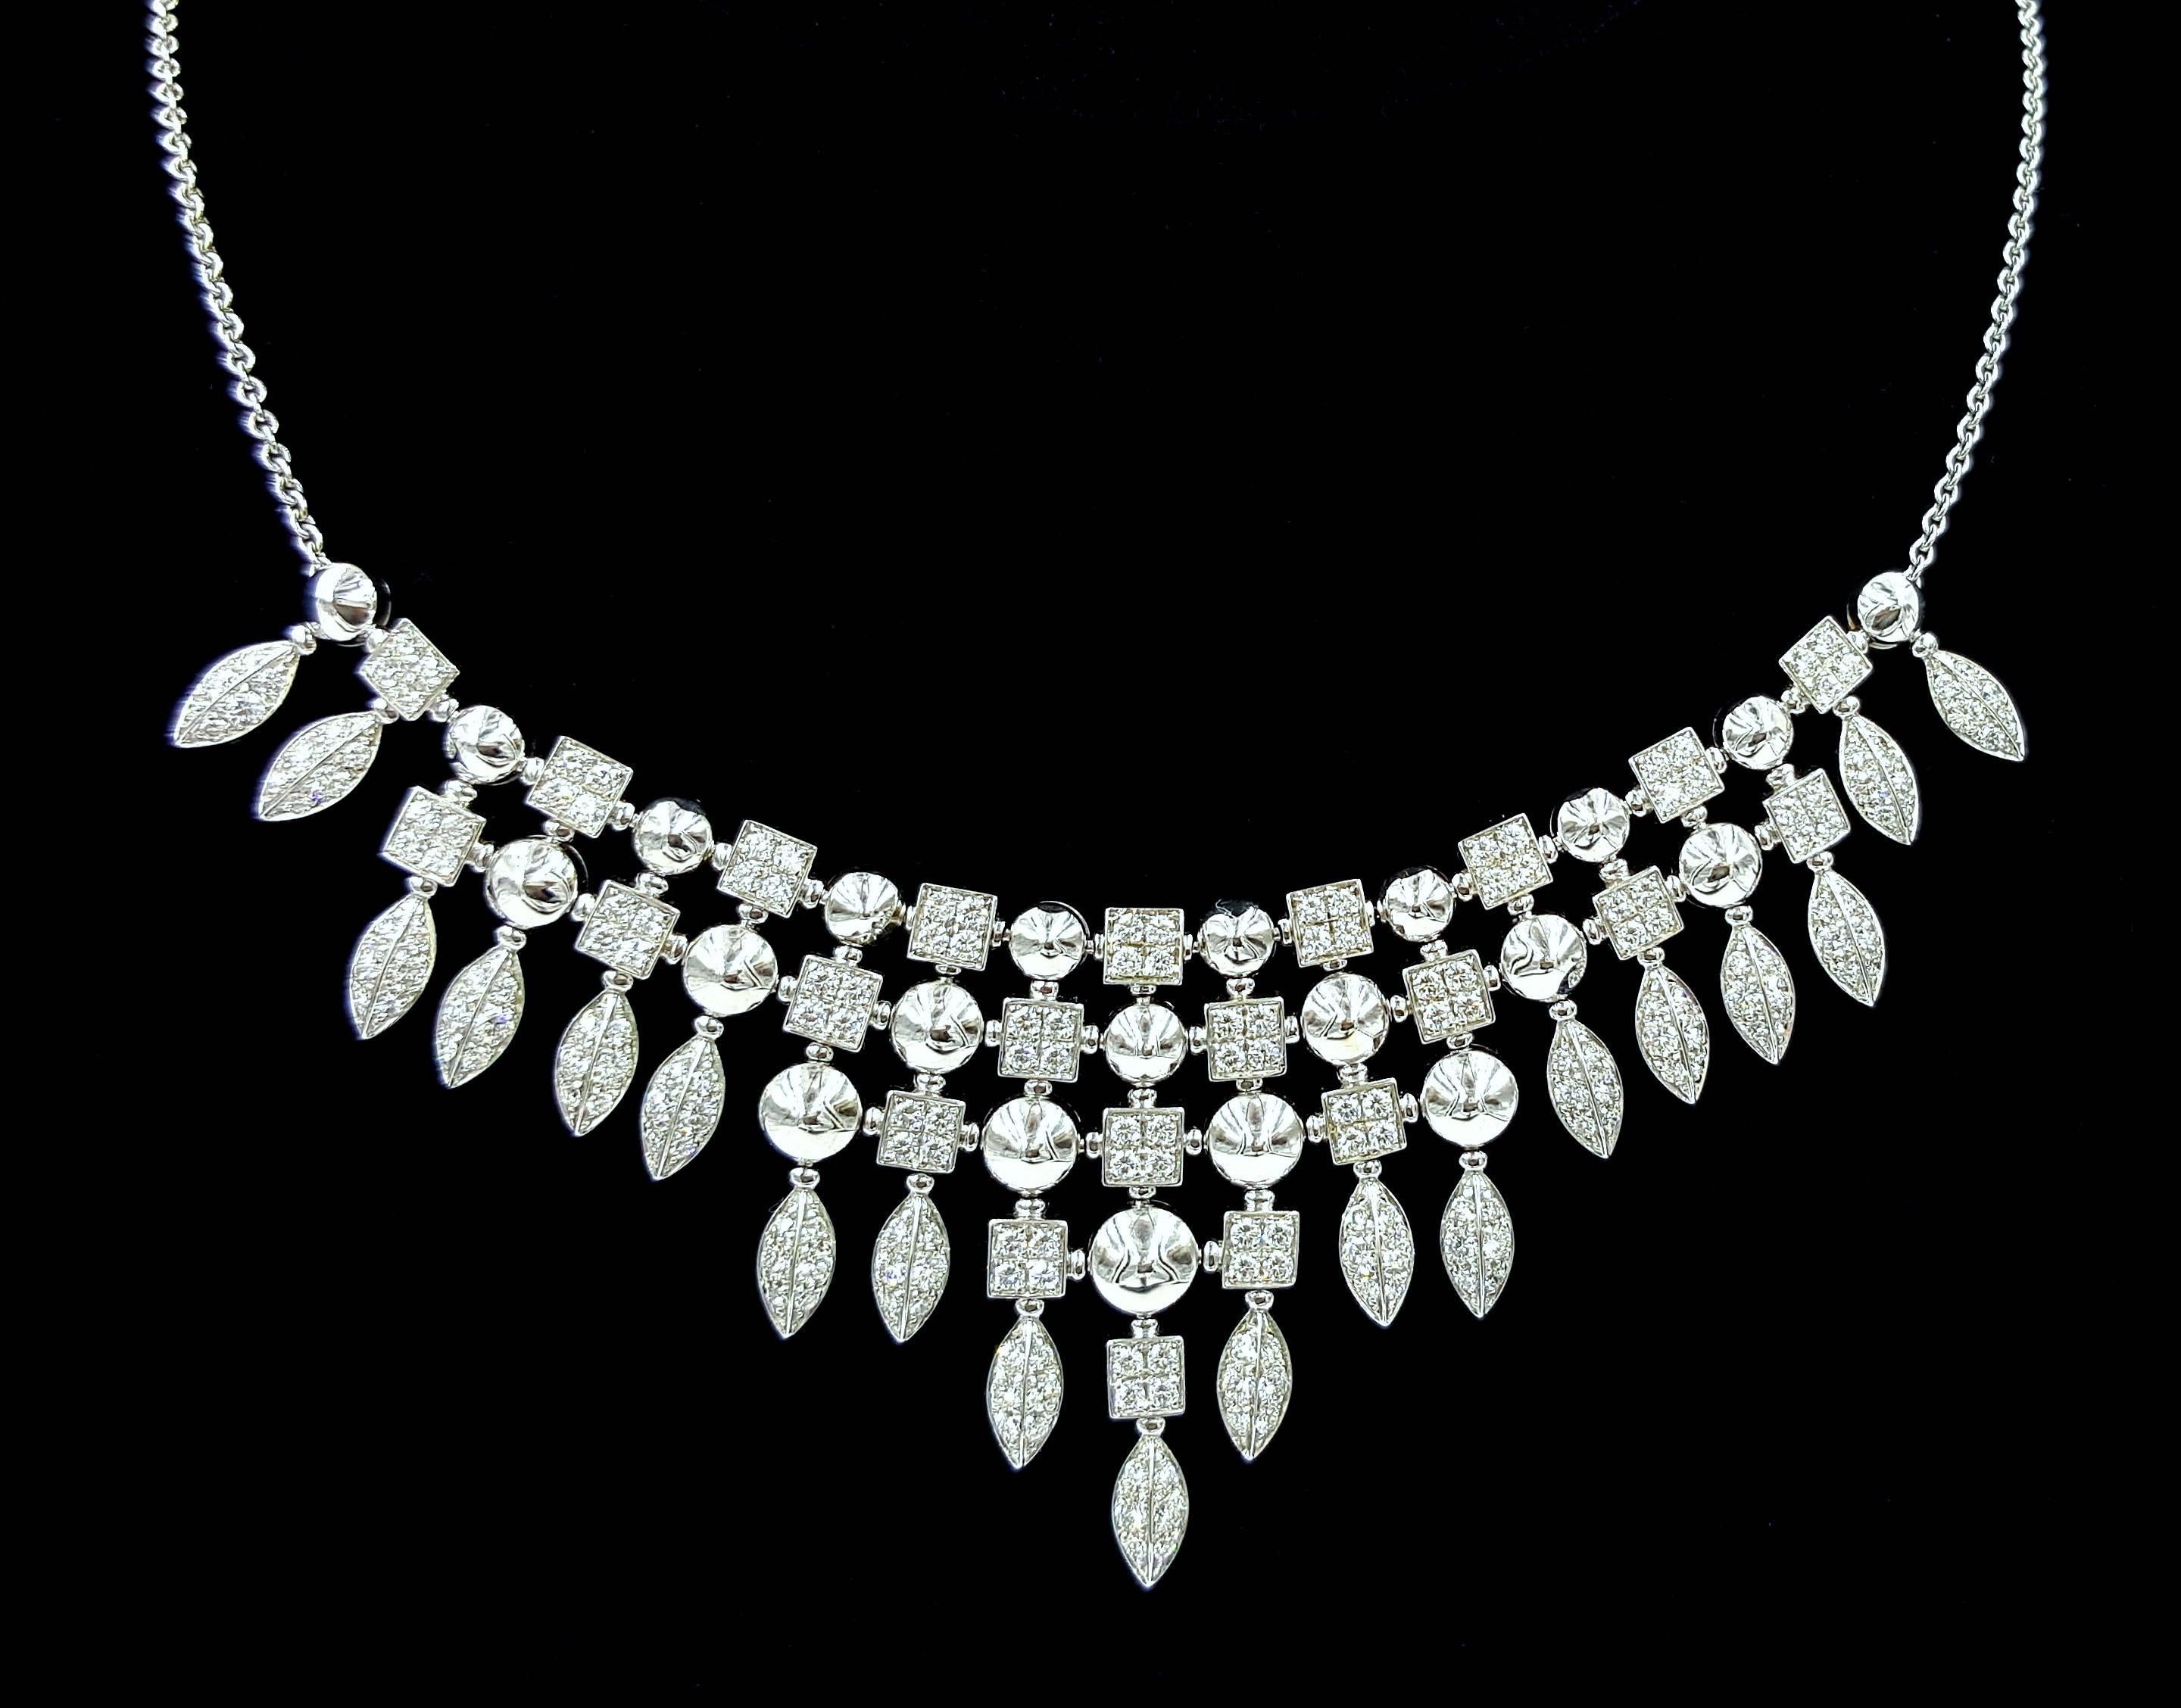 From the sophisticated Lucea Collection by Bulgari, we have recently acquired and brought to you exclusively through 1stDibs this breathtaking Lucea Evening Diamond Necklace Featuring 10.50 carats of diamonds VS1 in clarity, F-H white in color, and